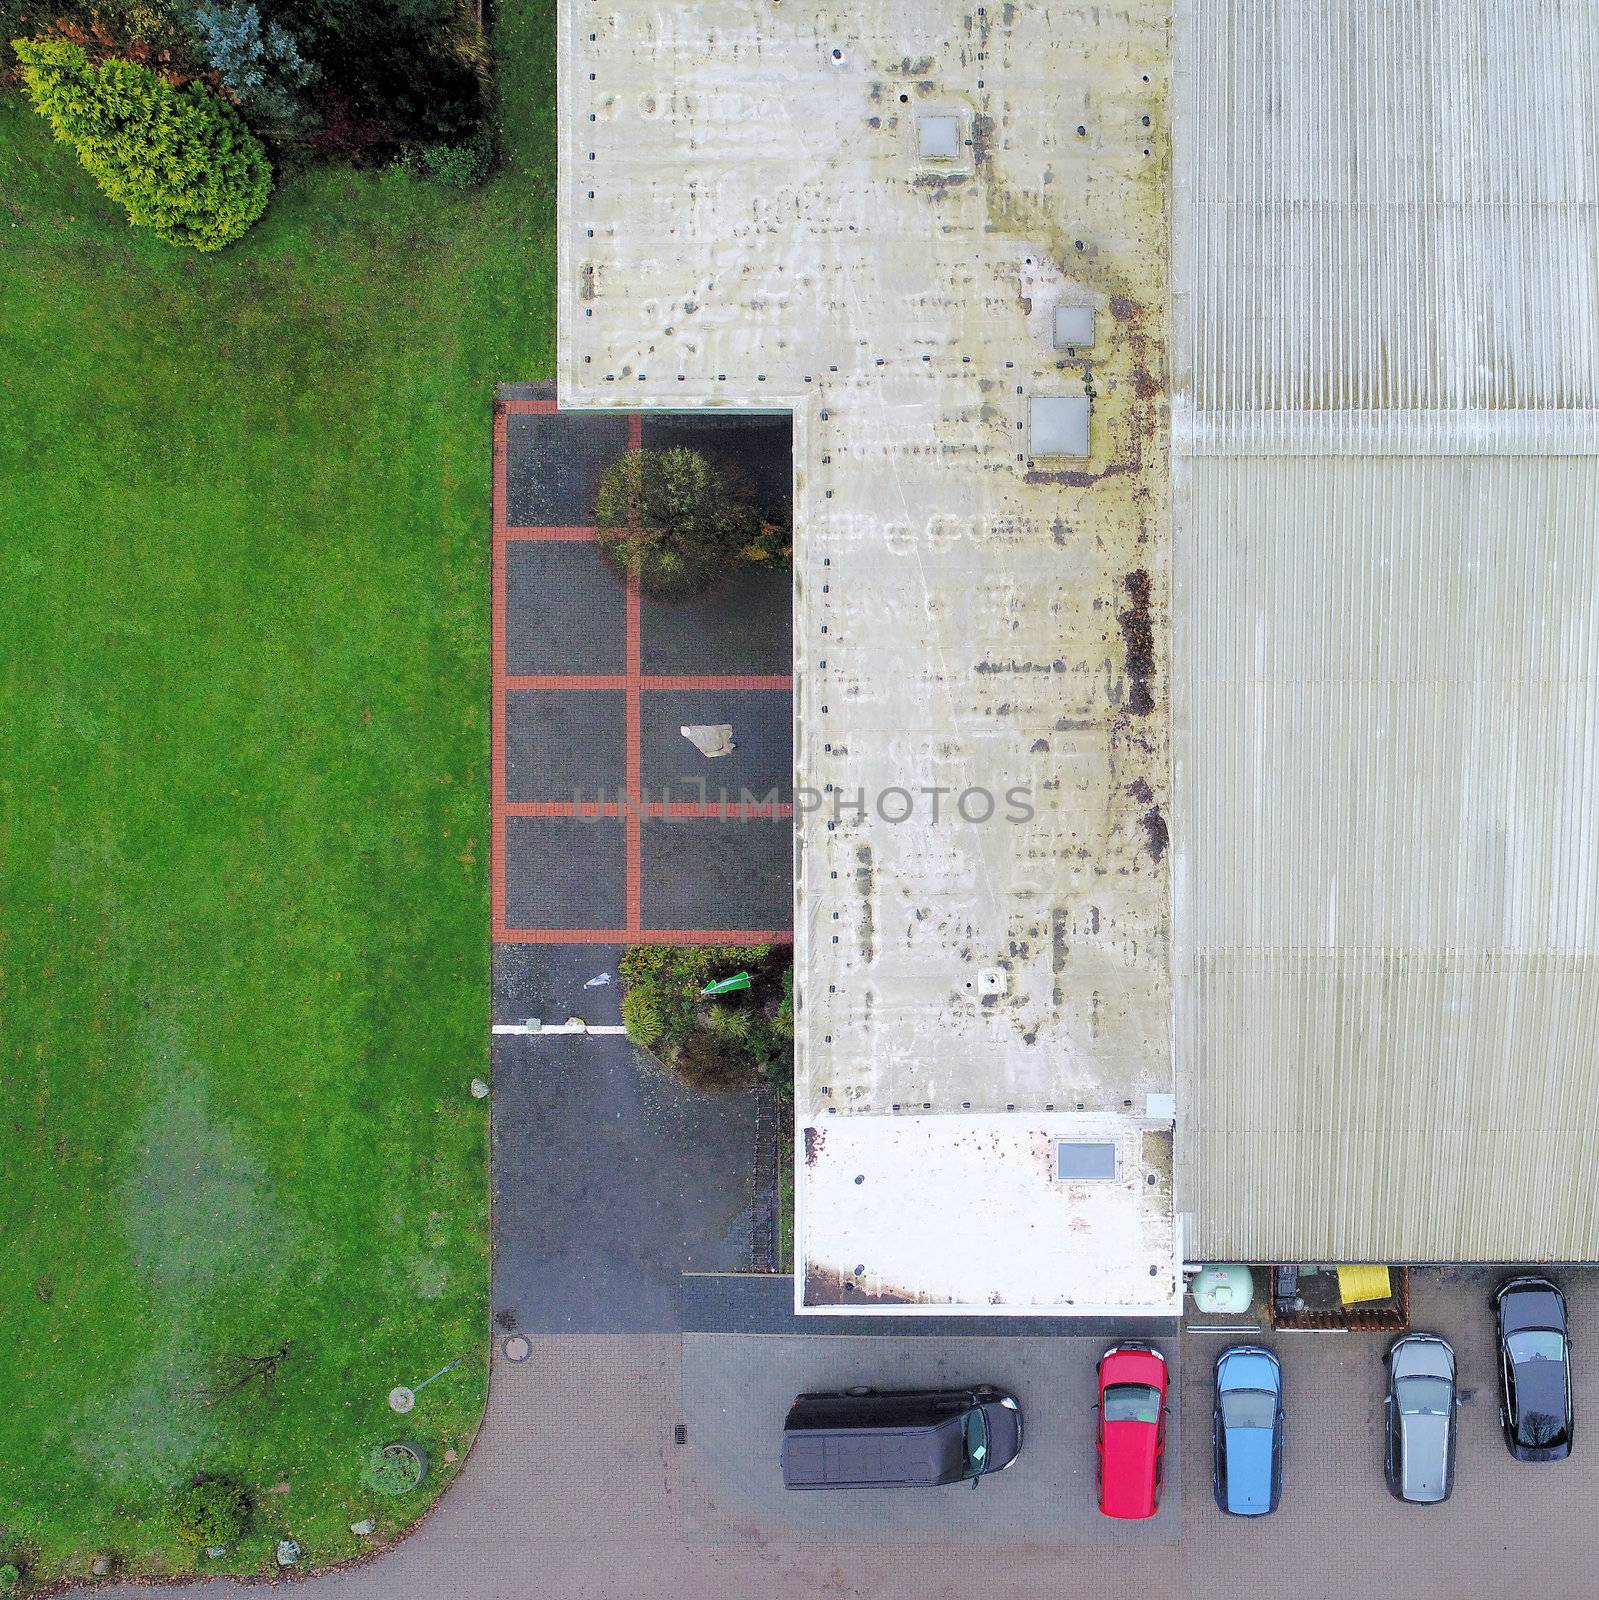 Cut vertical view from the air of an old, ugly tennis hall with parked cars in front of it, aerial view